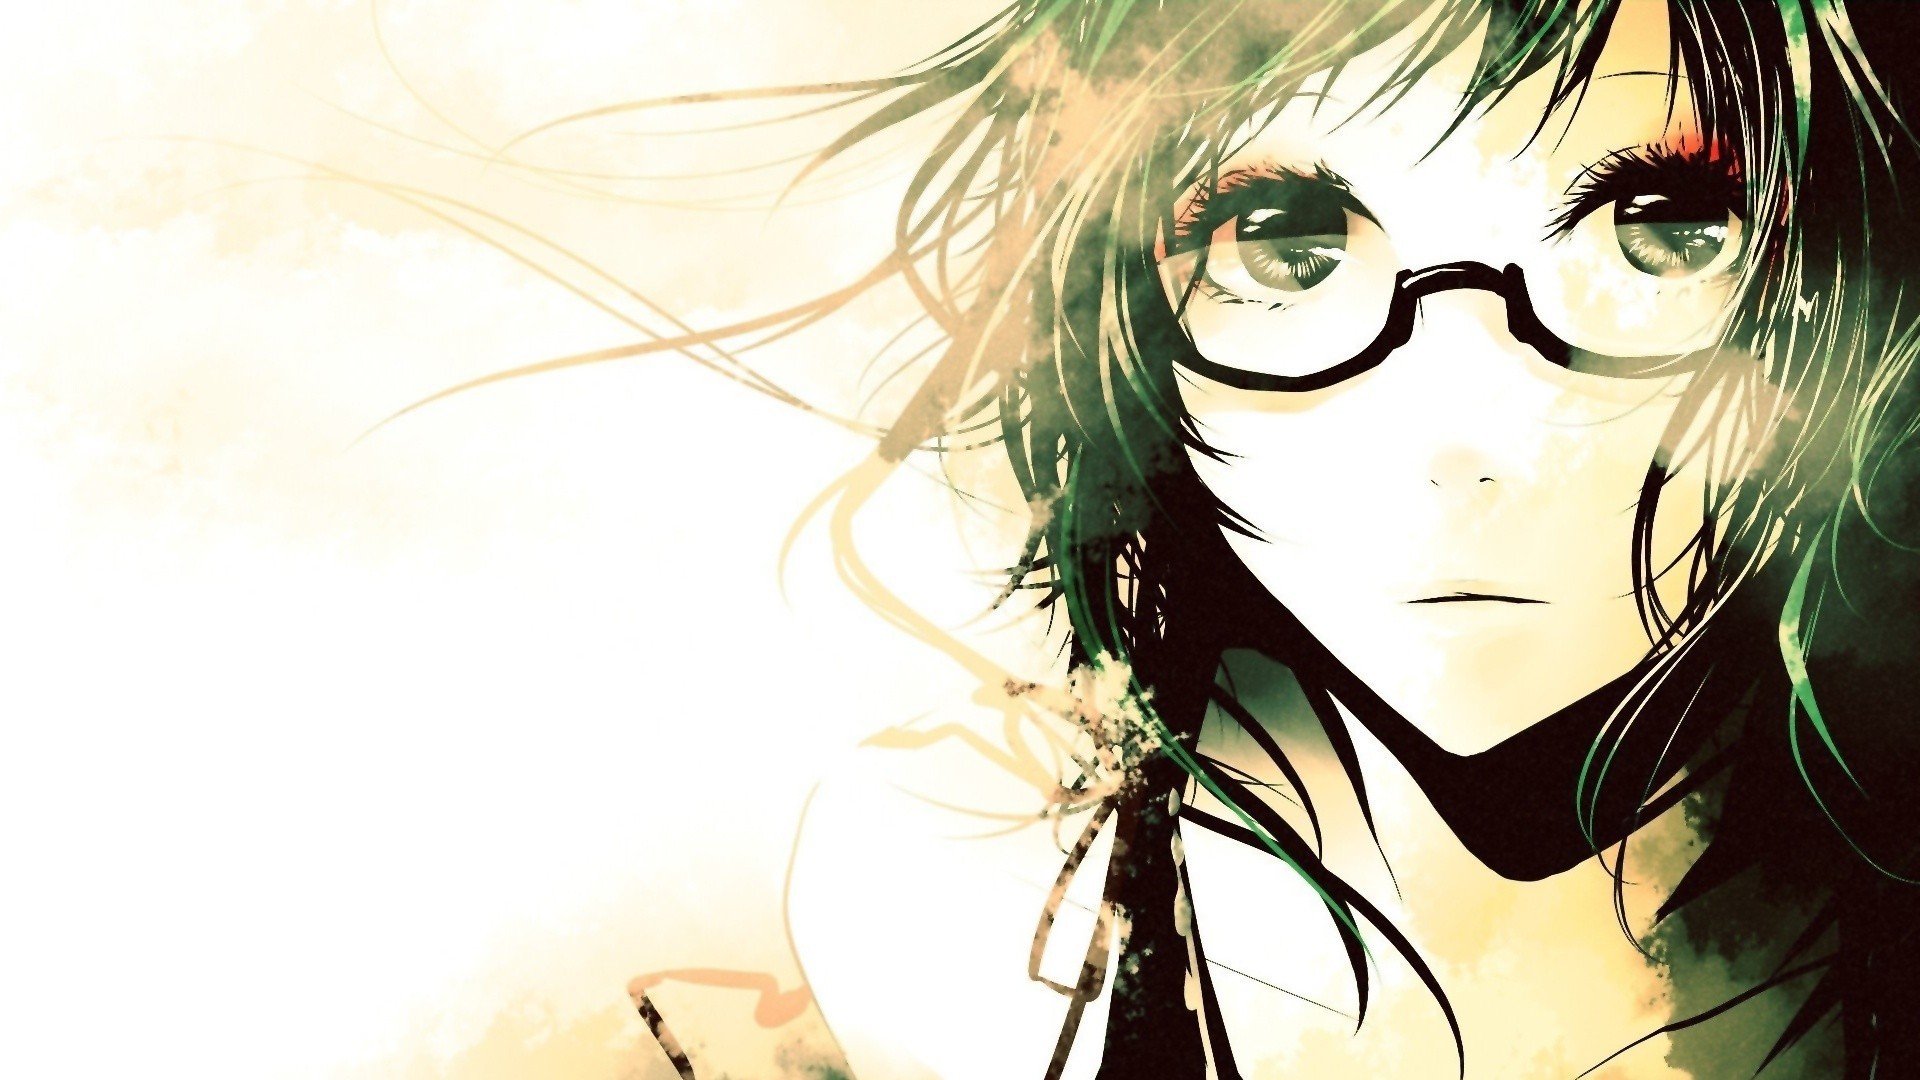 1920x1080  Anime Music Wallpapers | The Art Mad Wallpapers